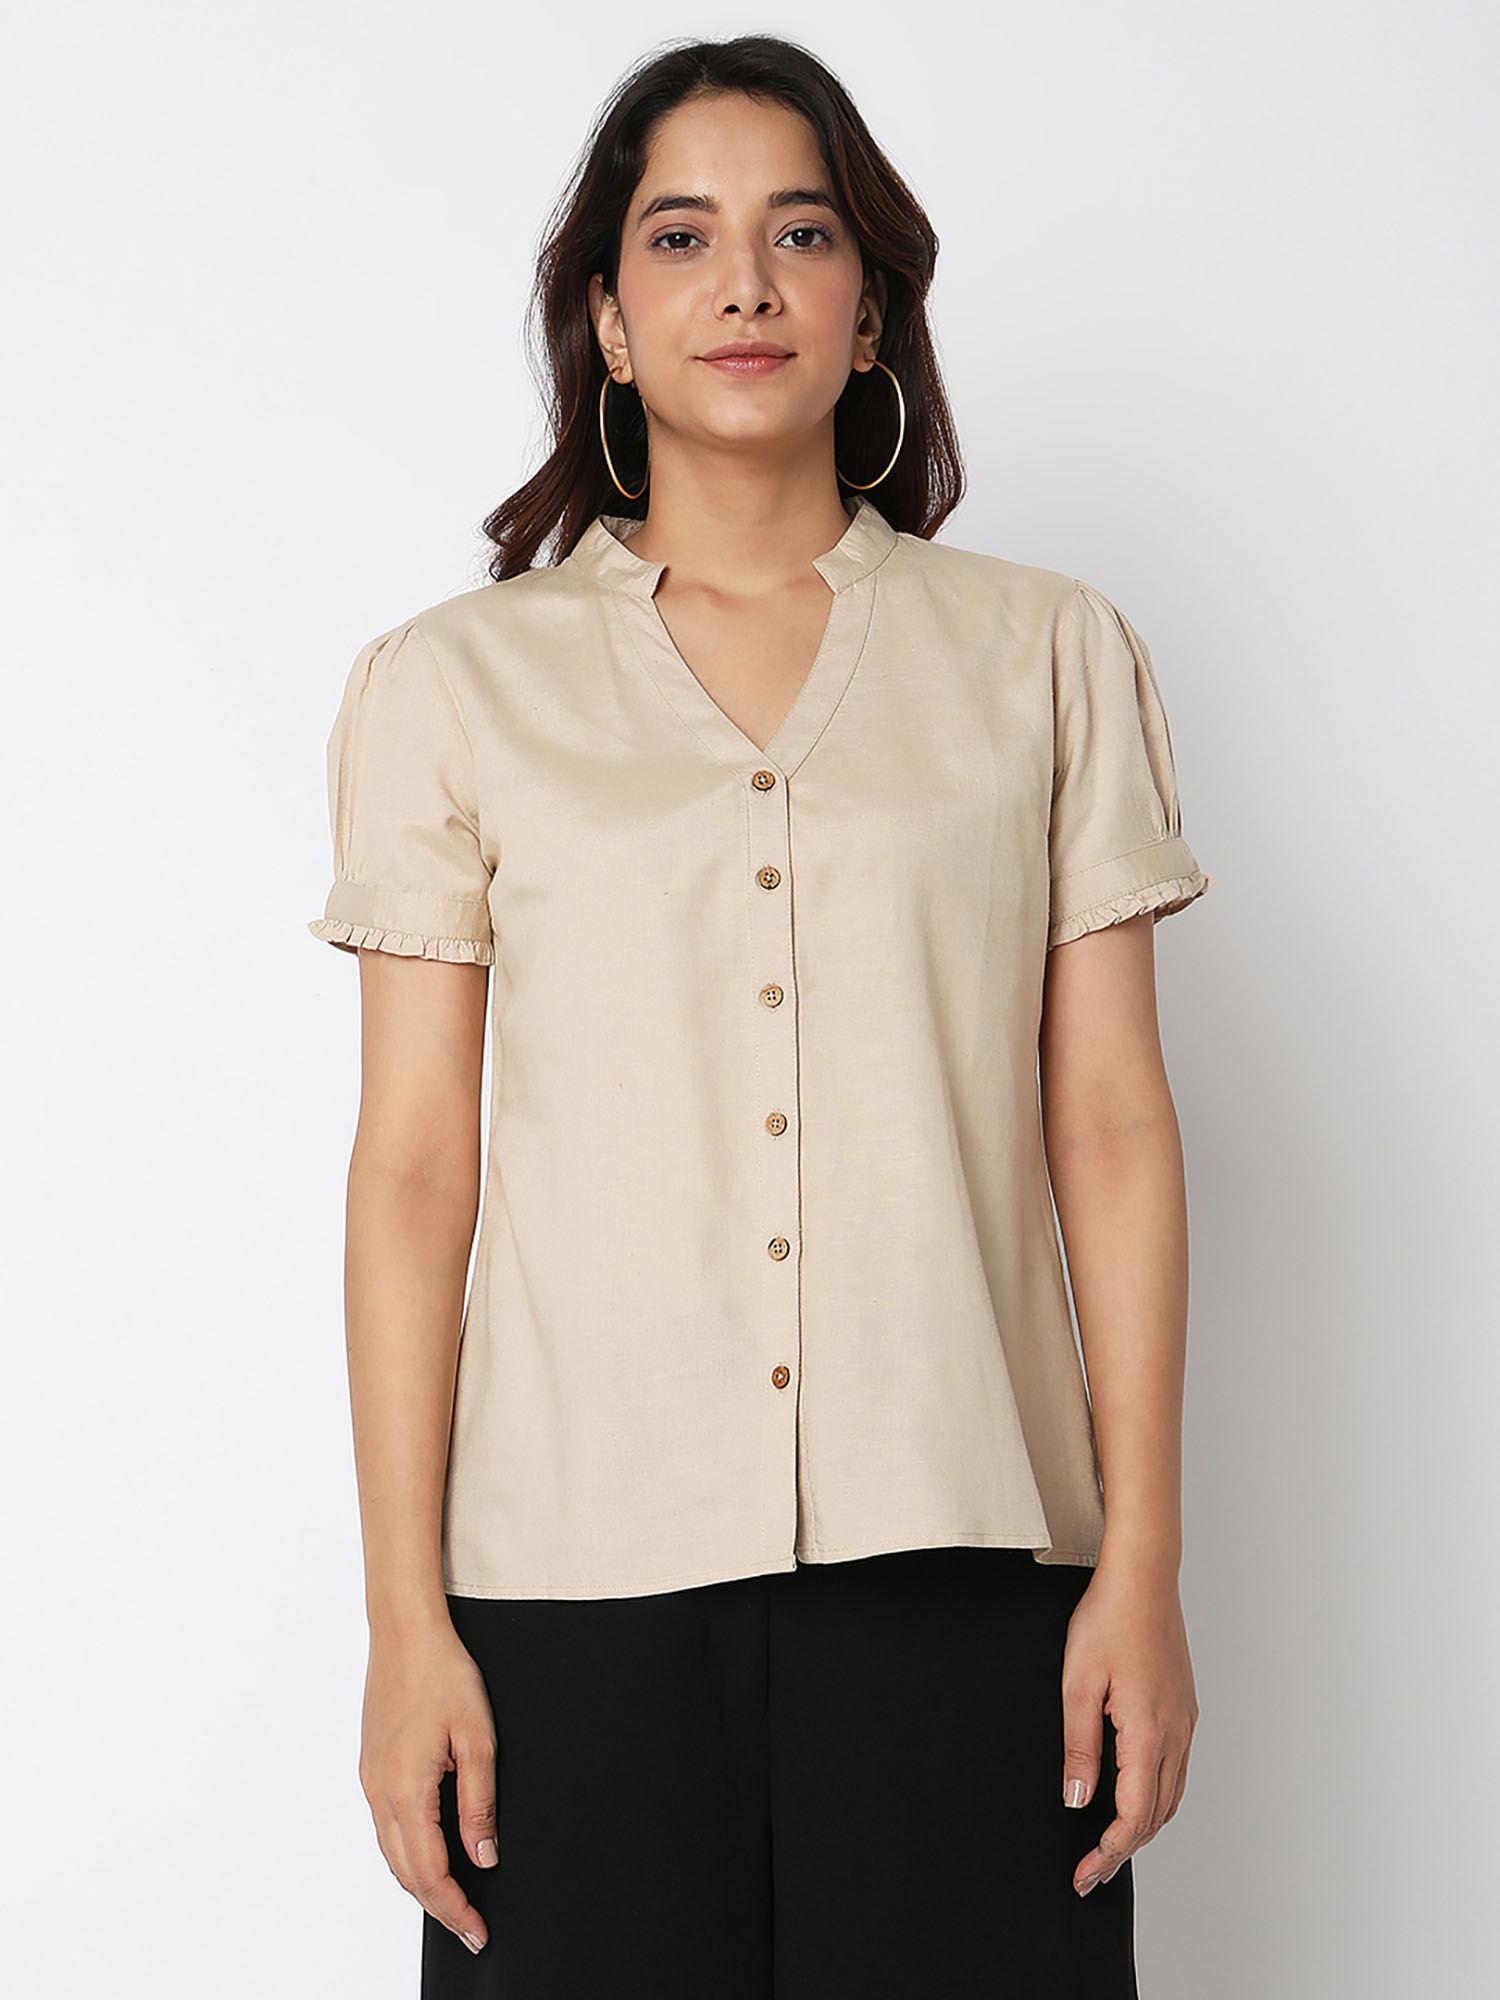 solid beige formal shirt with ruffle detail